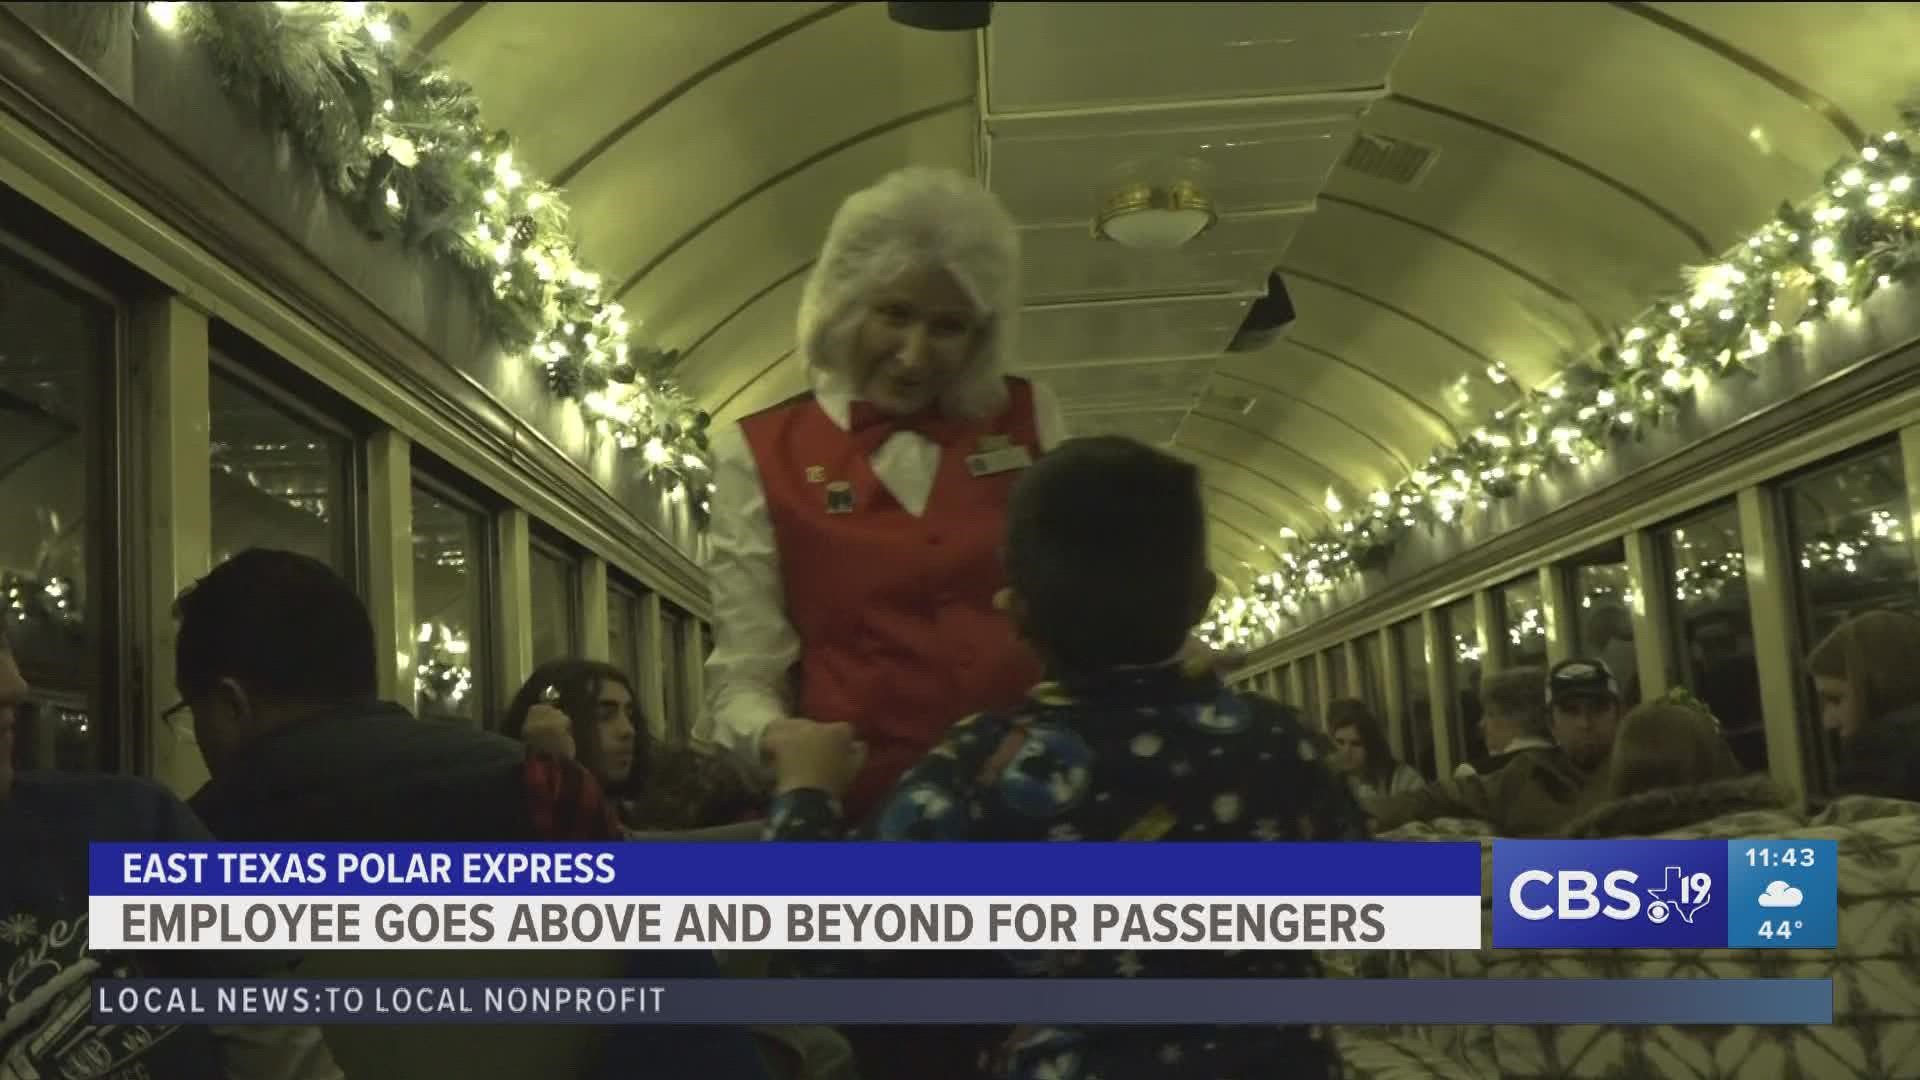 Joyce Jones has been a part of the Polar Express Christmas train ride at Texas State Railroad for 12 out of the 16 years it has been operating.